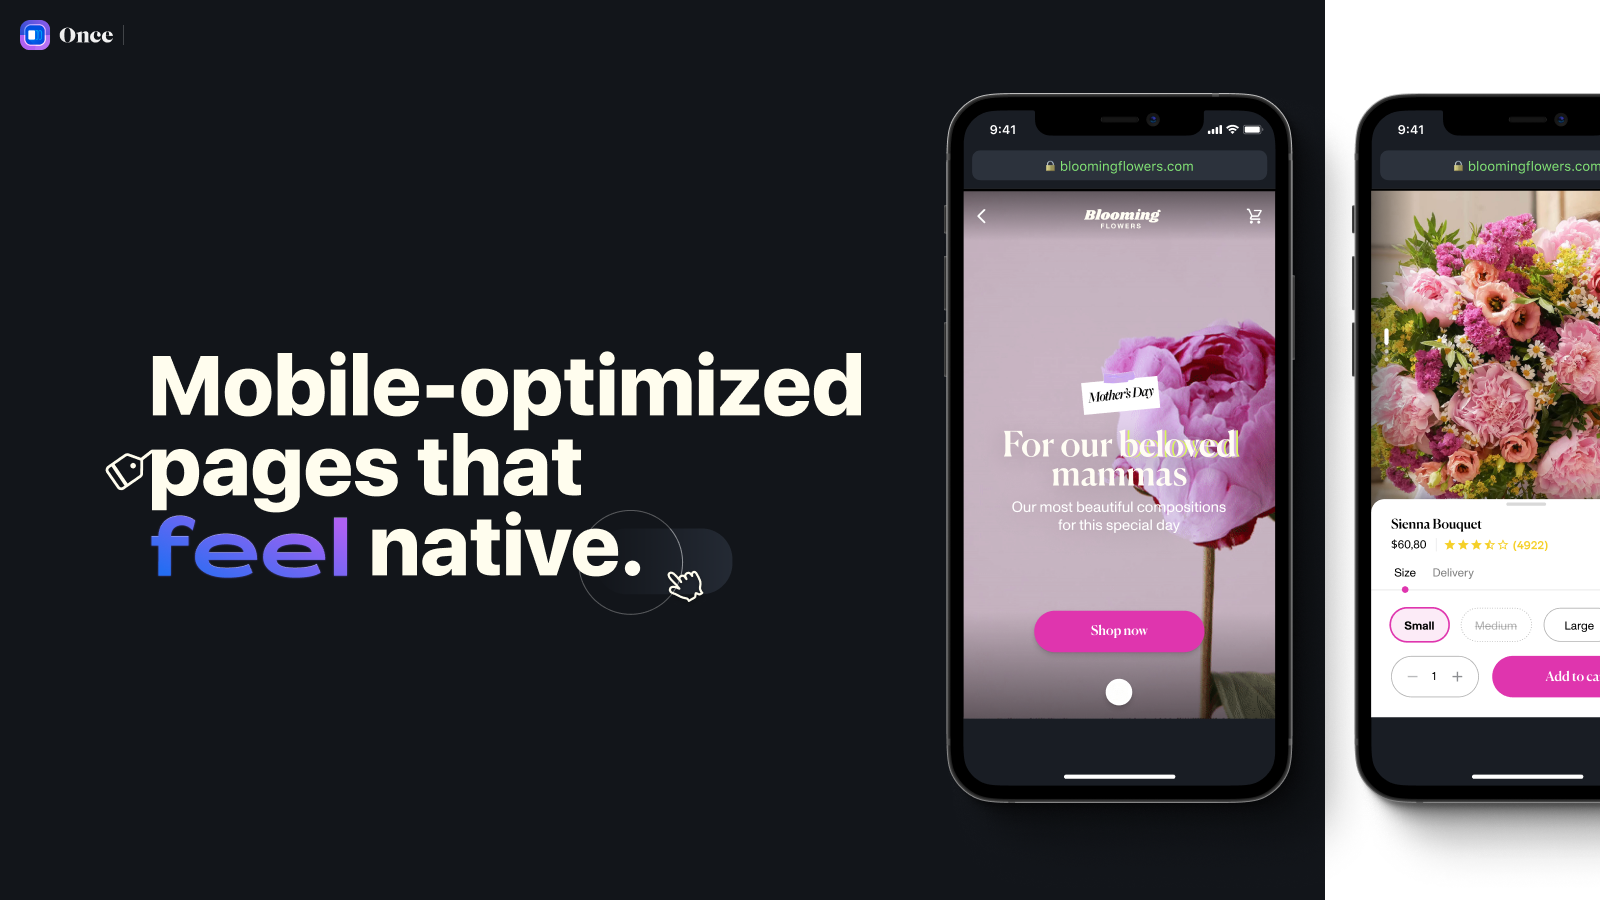 Mobile-optimized pages that feel native